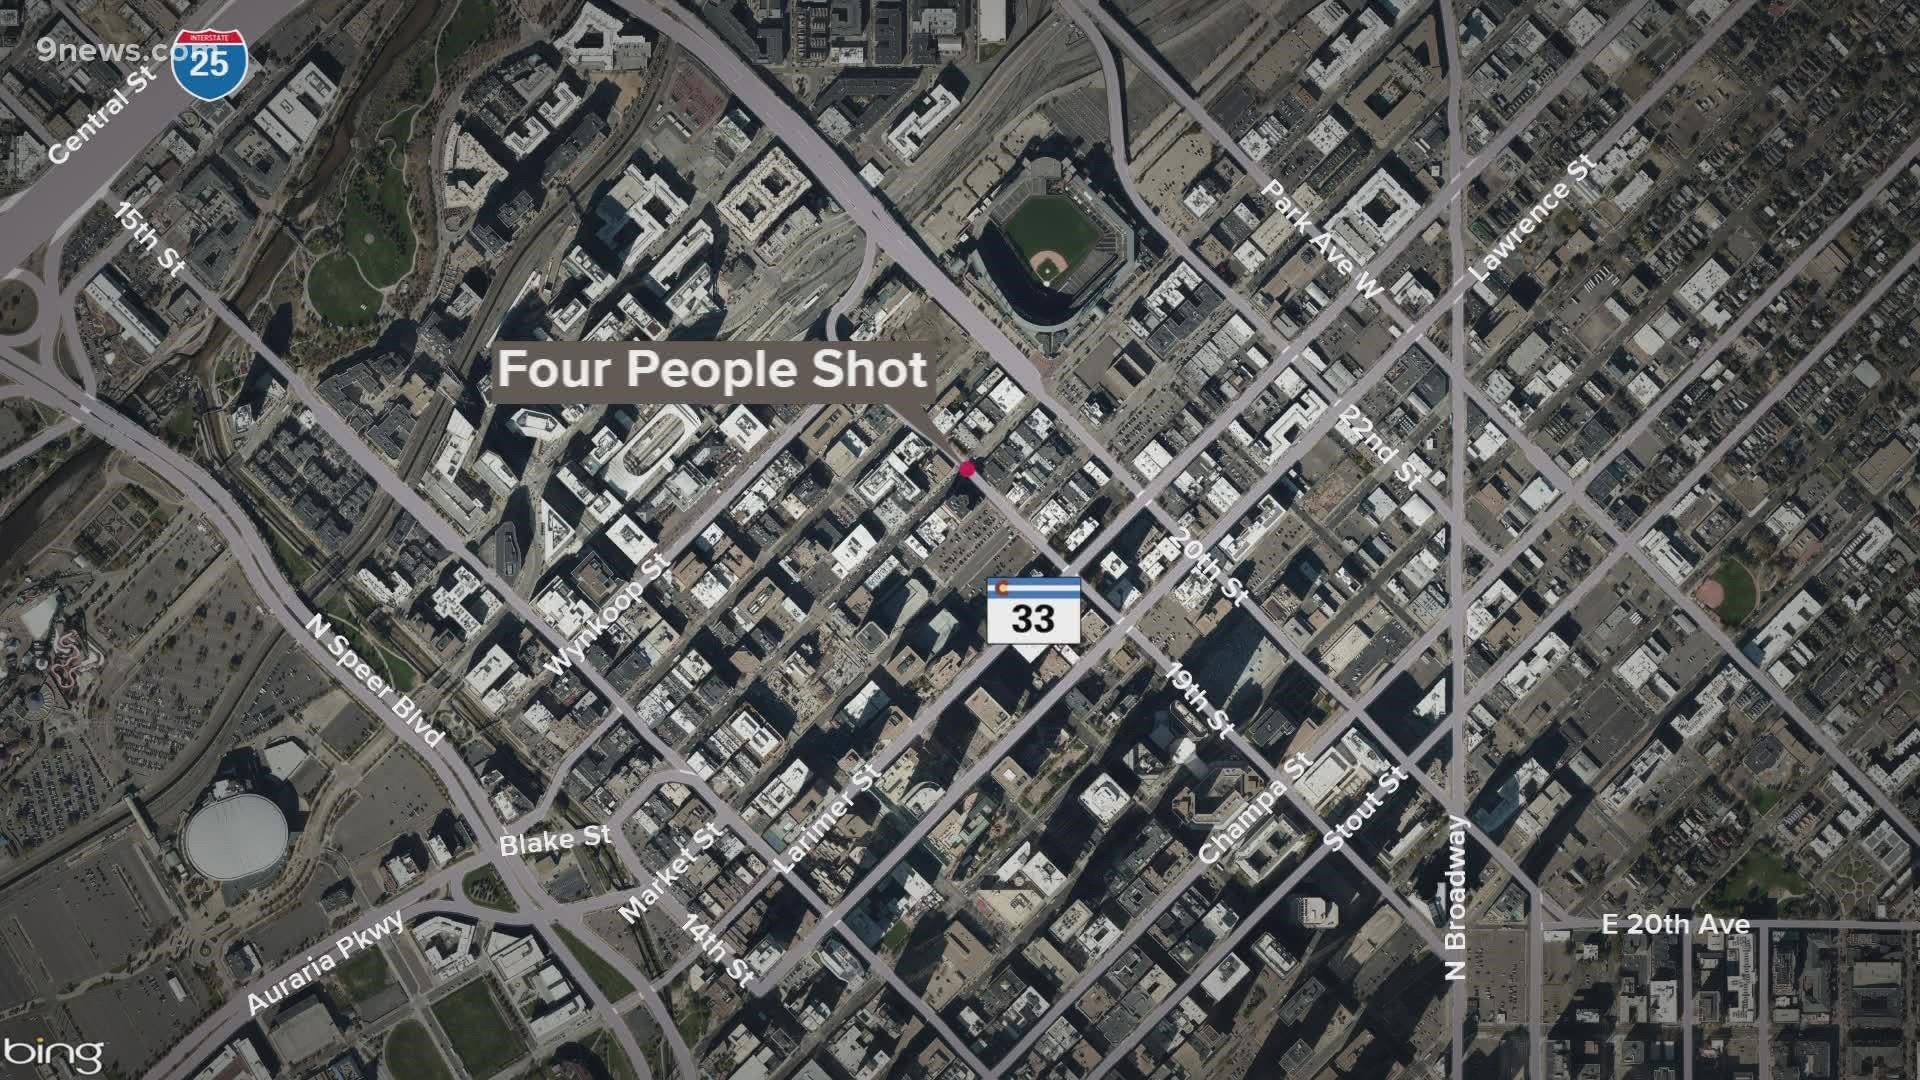 The shooting happened at The Cabin Tap House on Blake Street, police said.